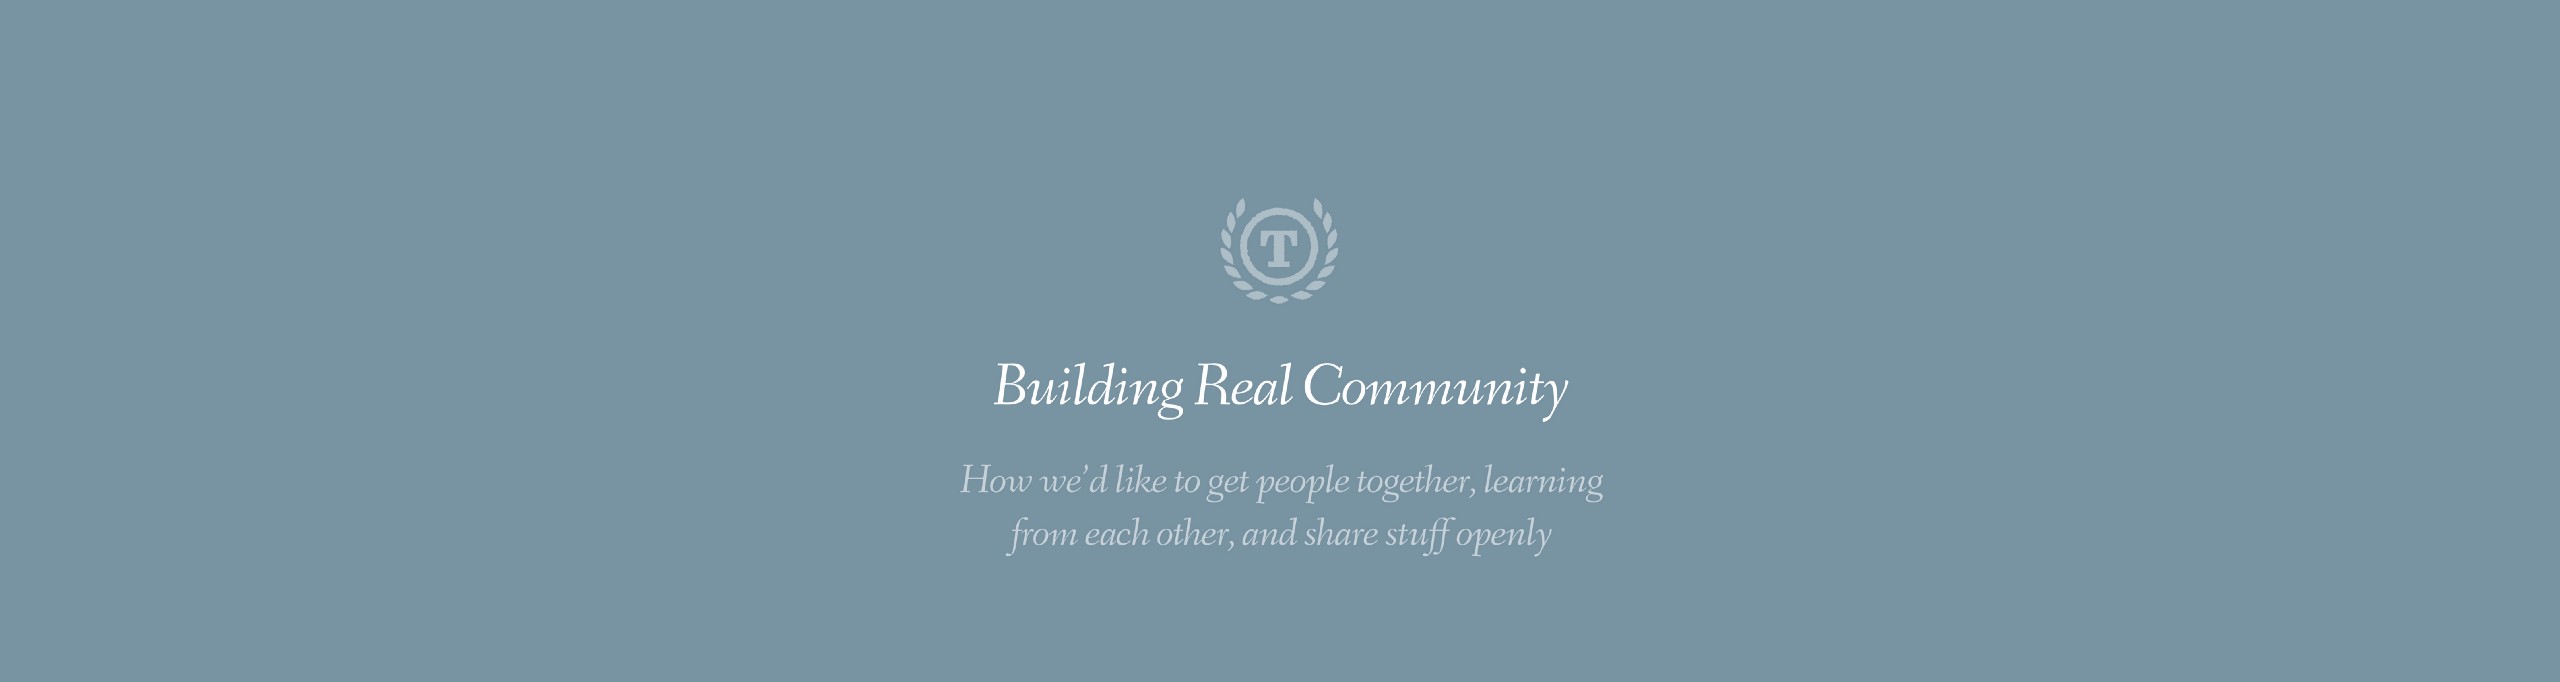 Building Real Community